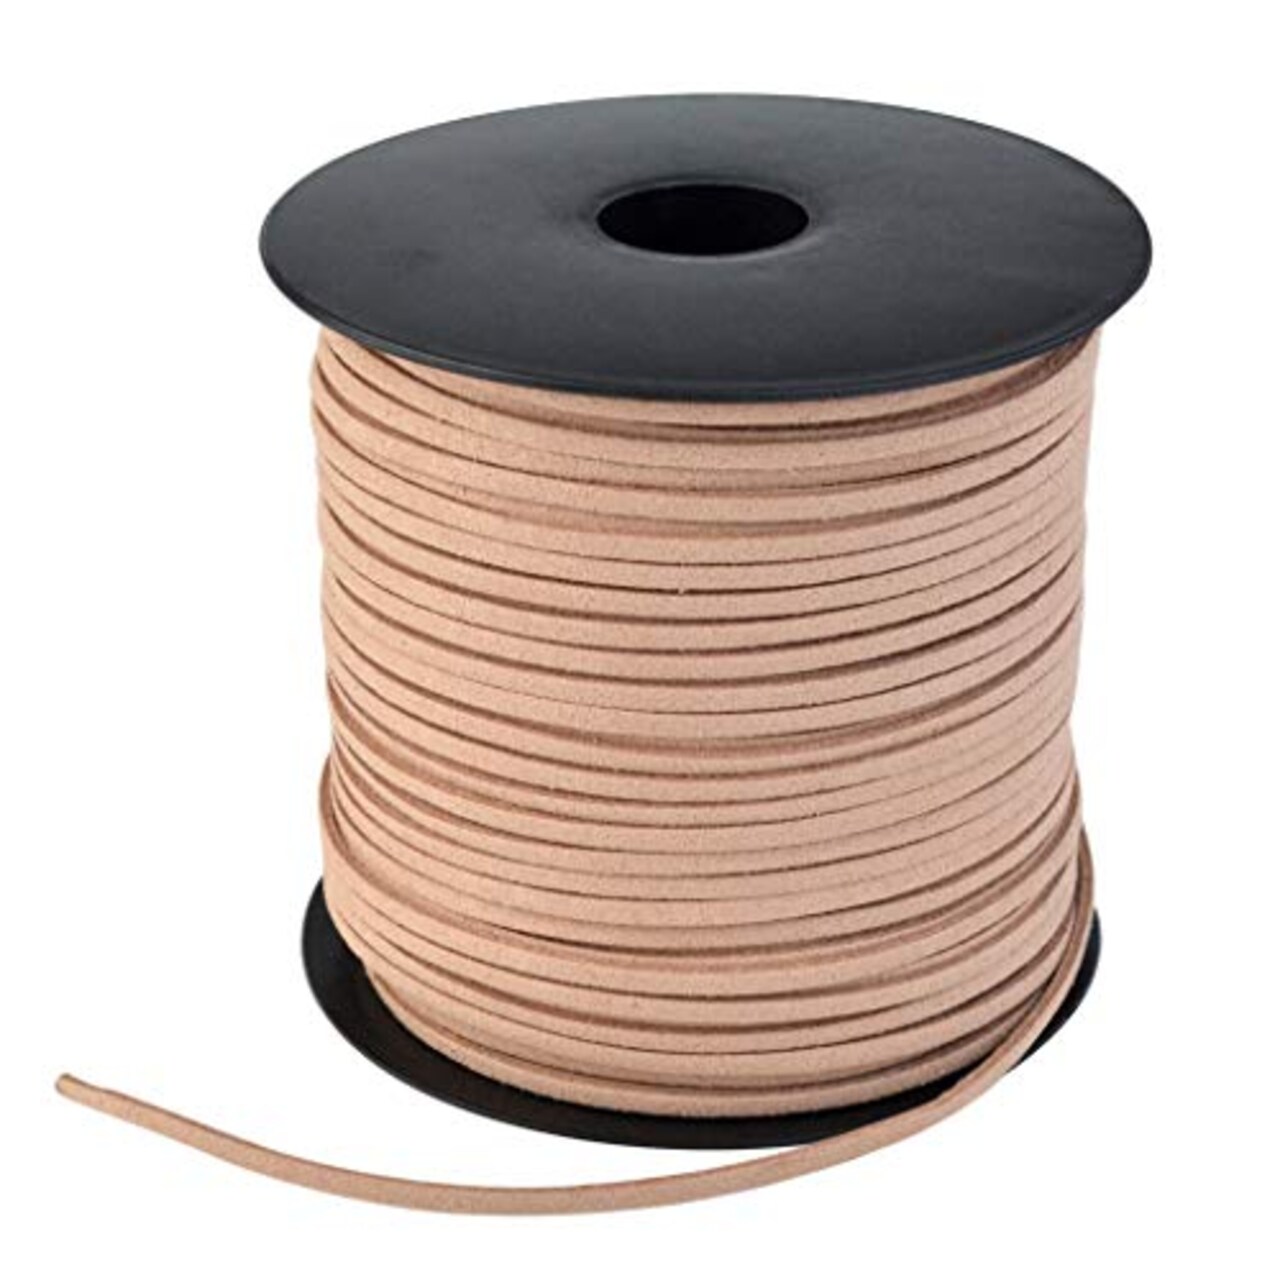 Wobe 100 Yards Suede Cord, Leather Cord 2.6mm x 1.5mm Suede Lace Faux  Leather Cord with Roll Spool for Bracelet Necklace Beading DIY Handmade  Crafts Thread (Brown)